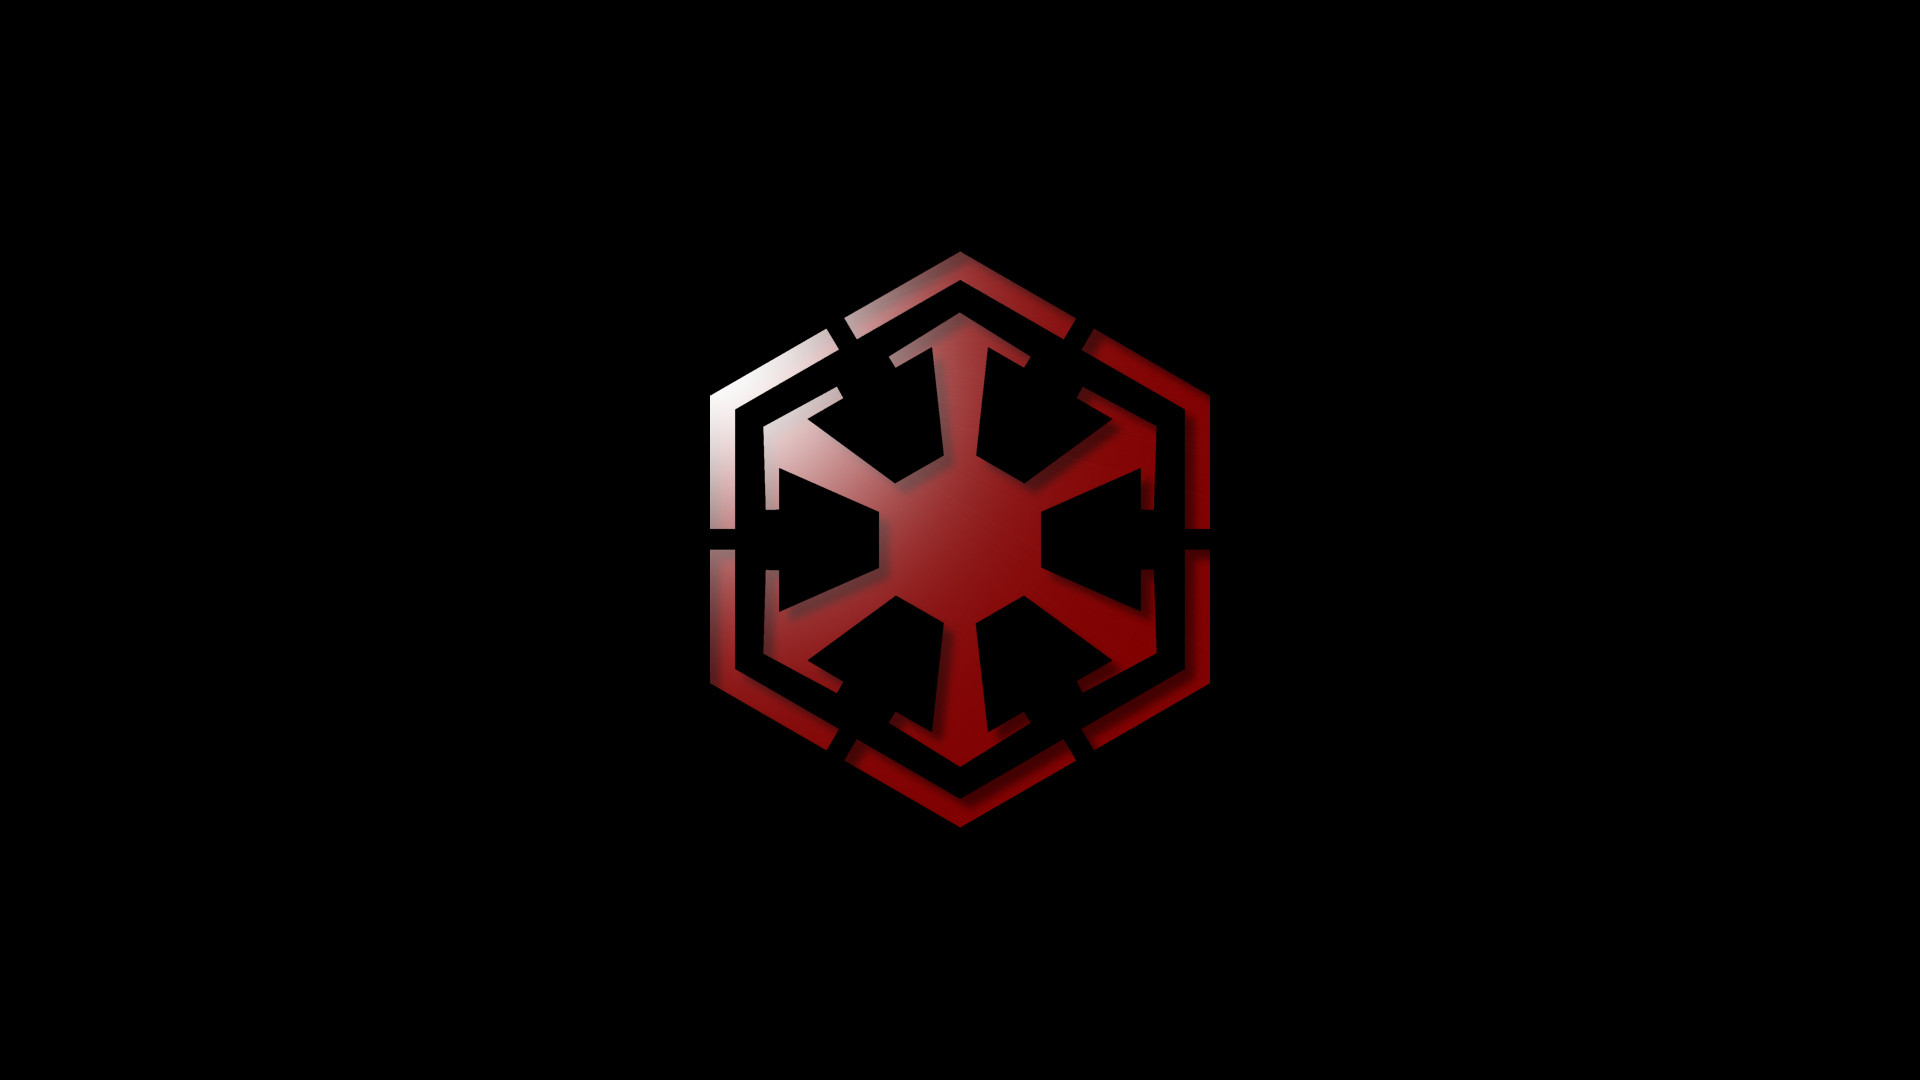 1920x1080 Displaying 14> Images For - Sith Empire Symbol Star Wars.